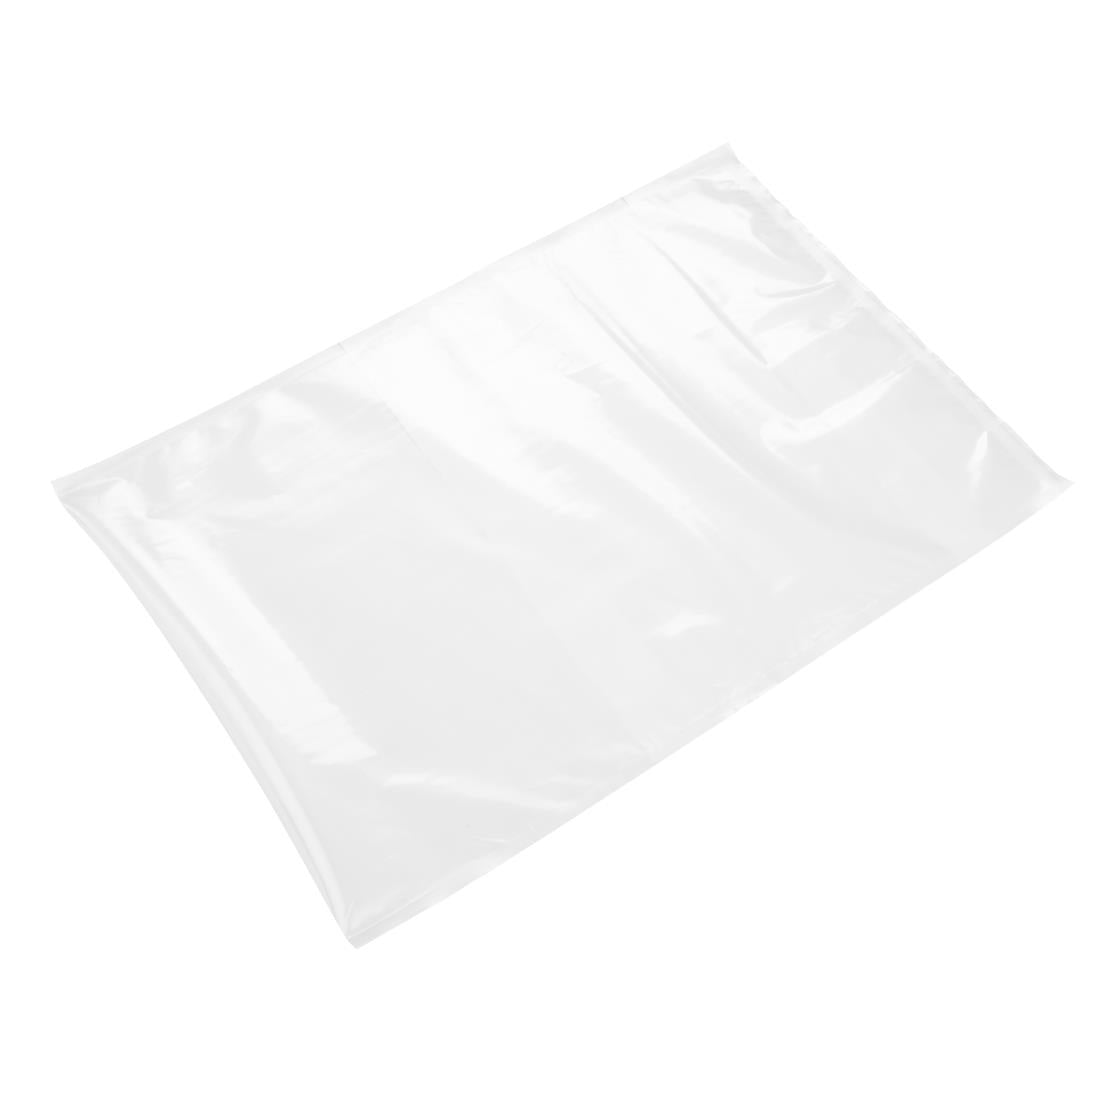 CU399 Vogue Chamber Vacuum Pack Bags 400x600mm (Pack of 50)